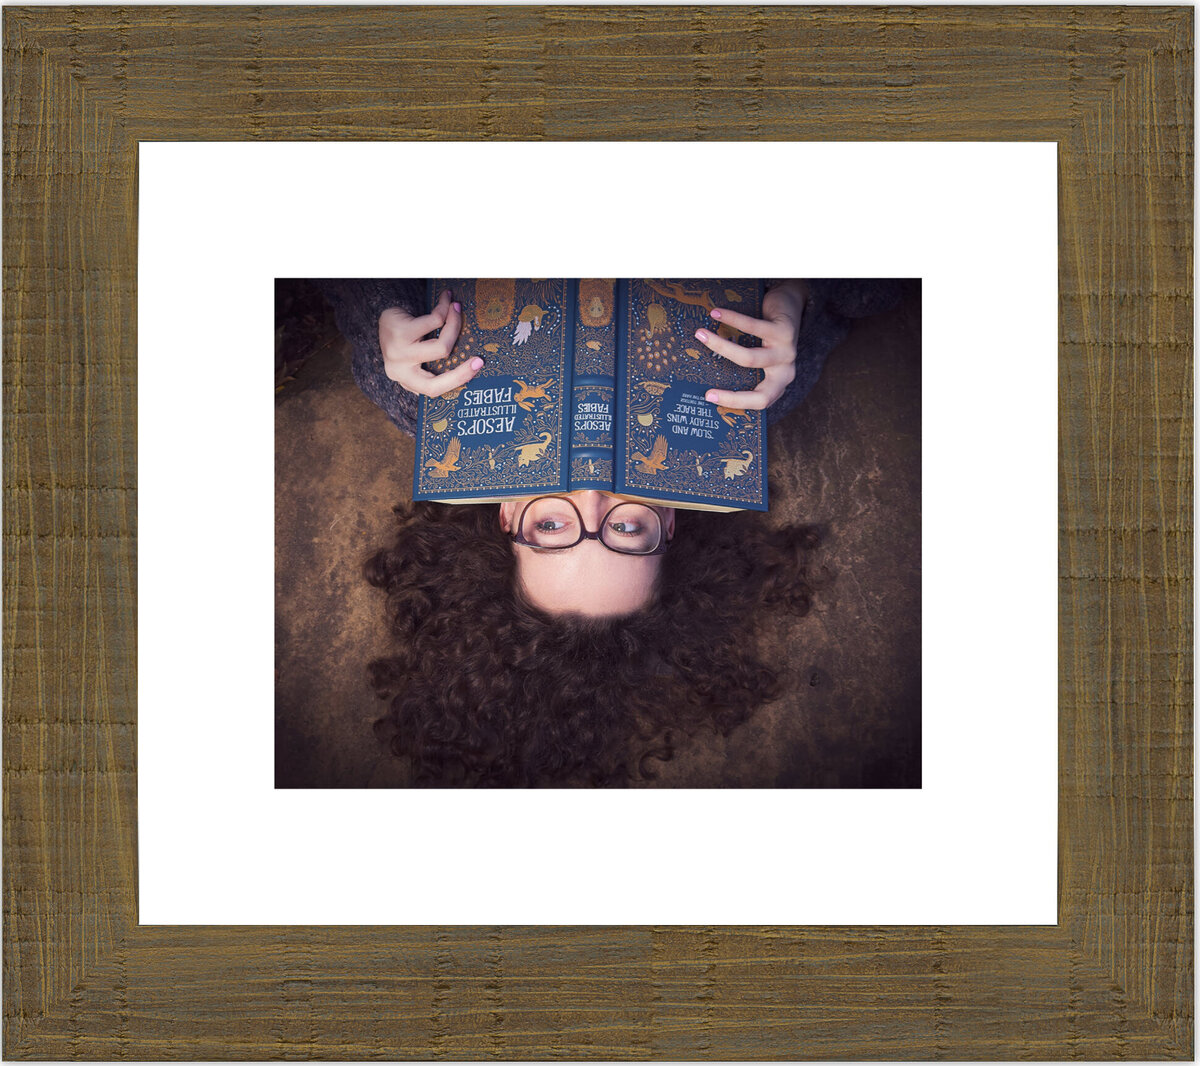 Senior Cali loves to read, even when upside down or on a rock! Mounted on a Rustic frame with  White Mat